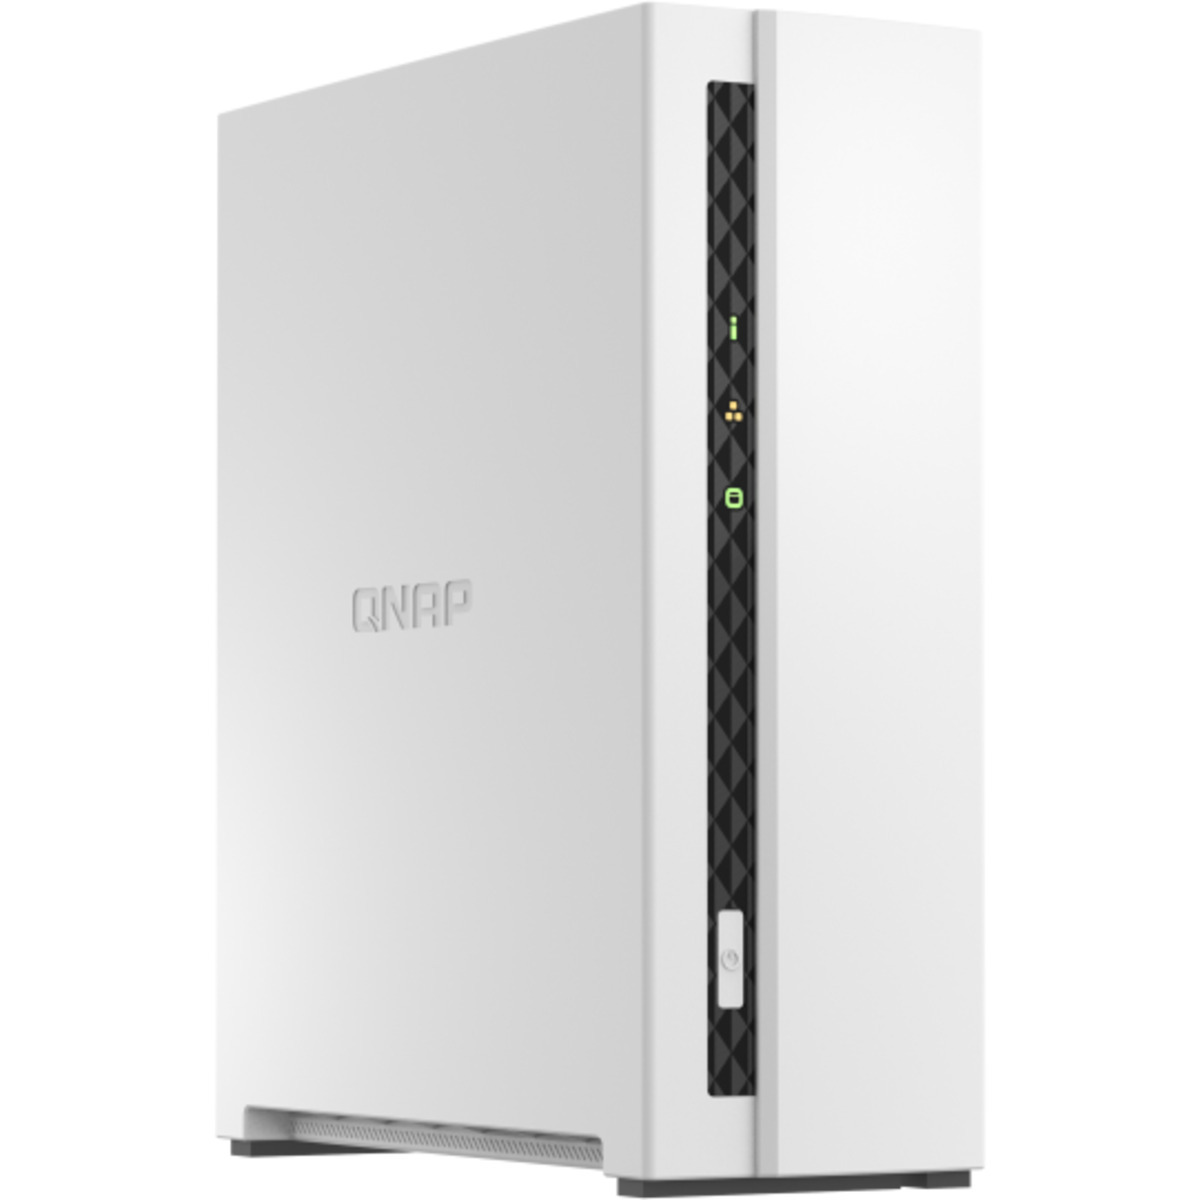 buy $277 QNAP TS-133 2tb Desktop NAS - Network Attached Storage Device 1x2000gb Seagate BarraCuda ST2000DM008 3.5 7200rpm SATA 6Gb/s HDD CONSUMER Class Drives Installed - Burn-In Tested - nas headquarters buy network attached storage server device das new raid-5 free shipping simply usa TS-133